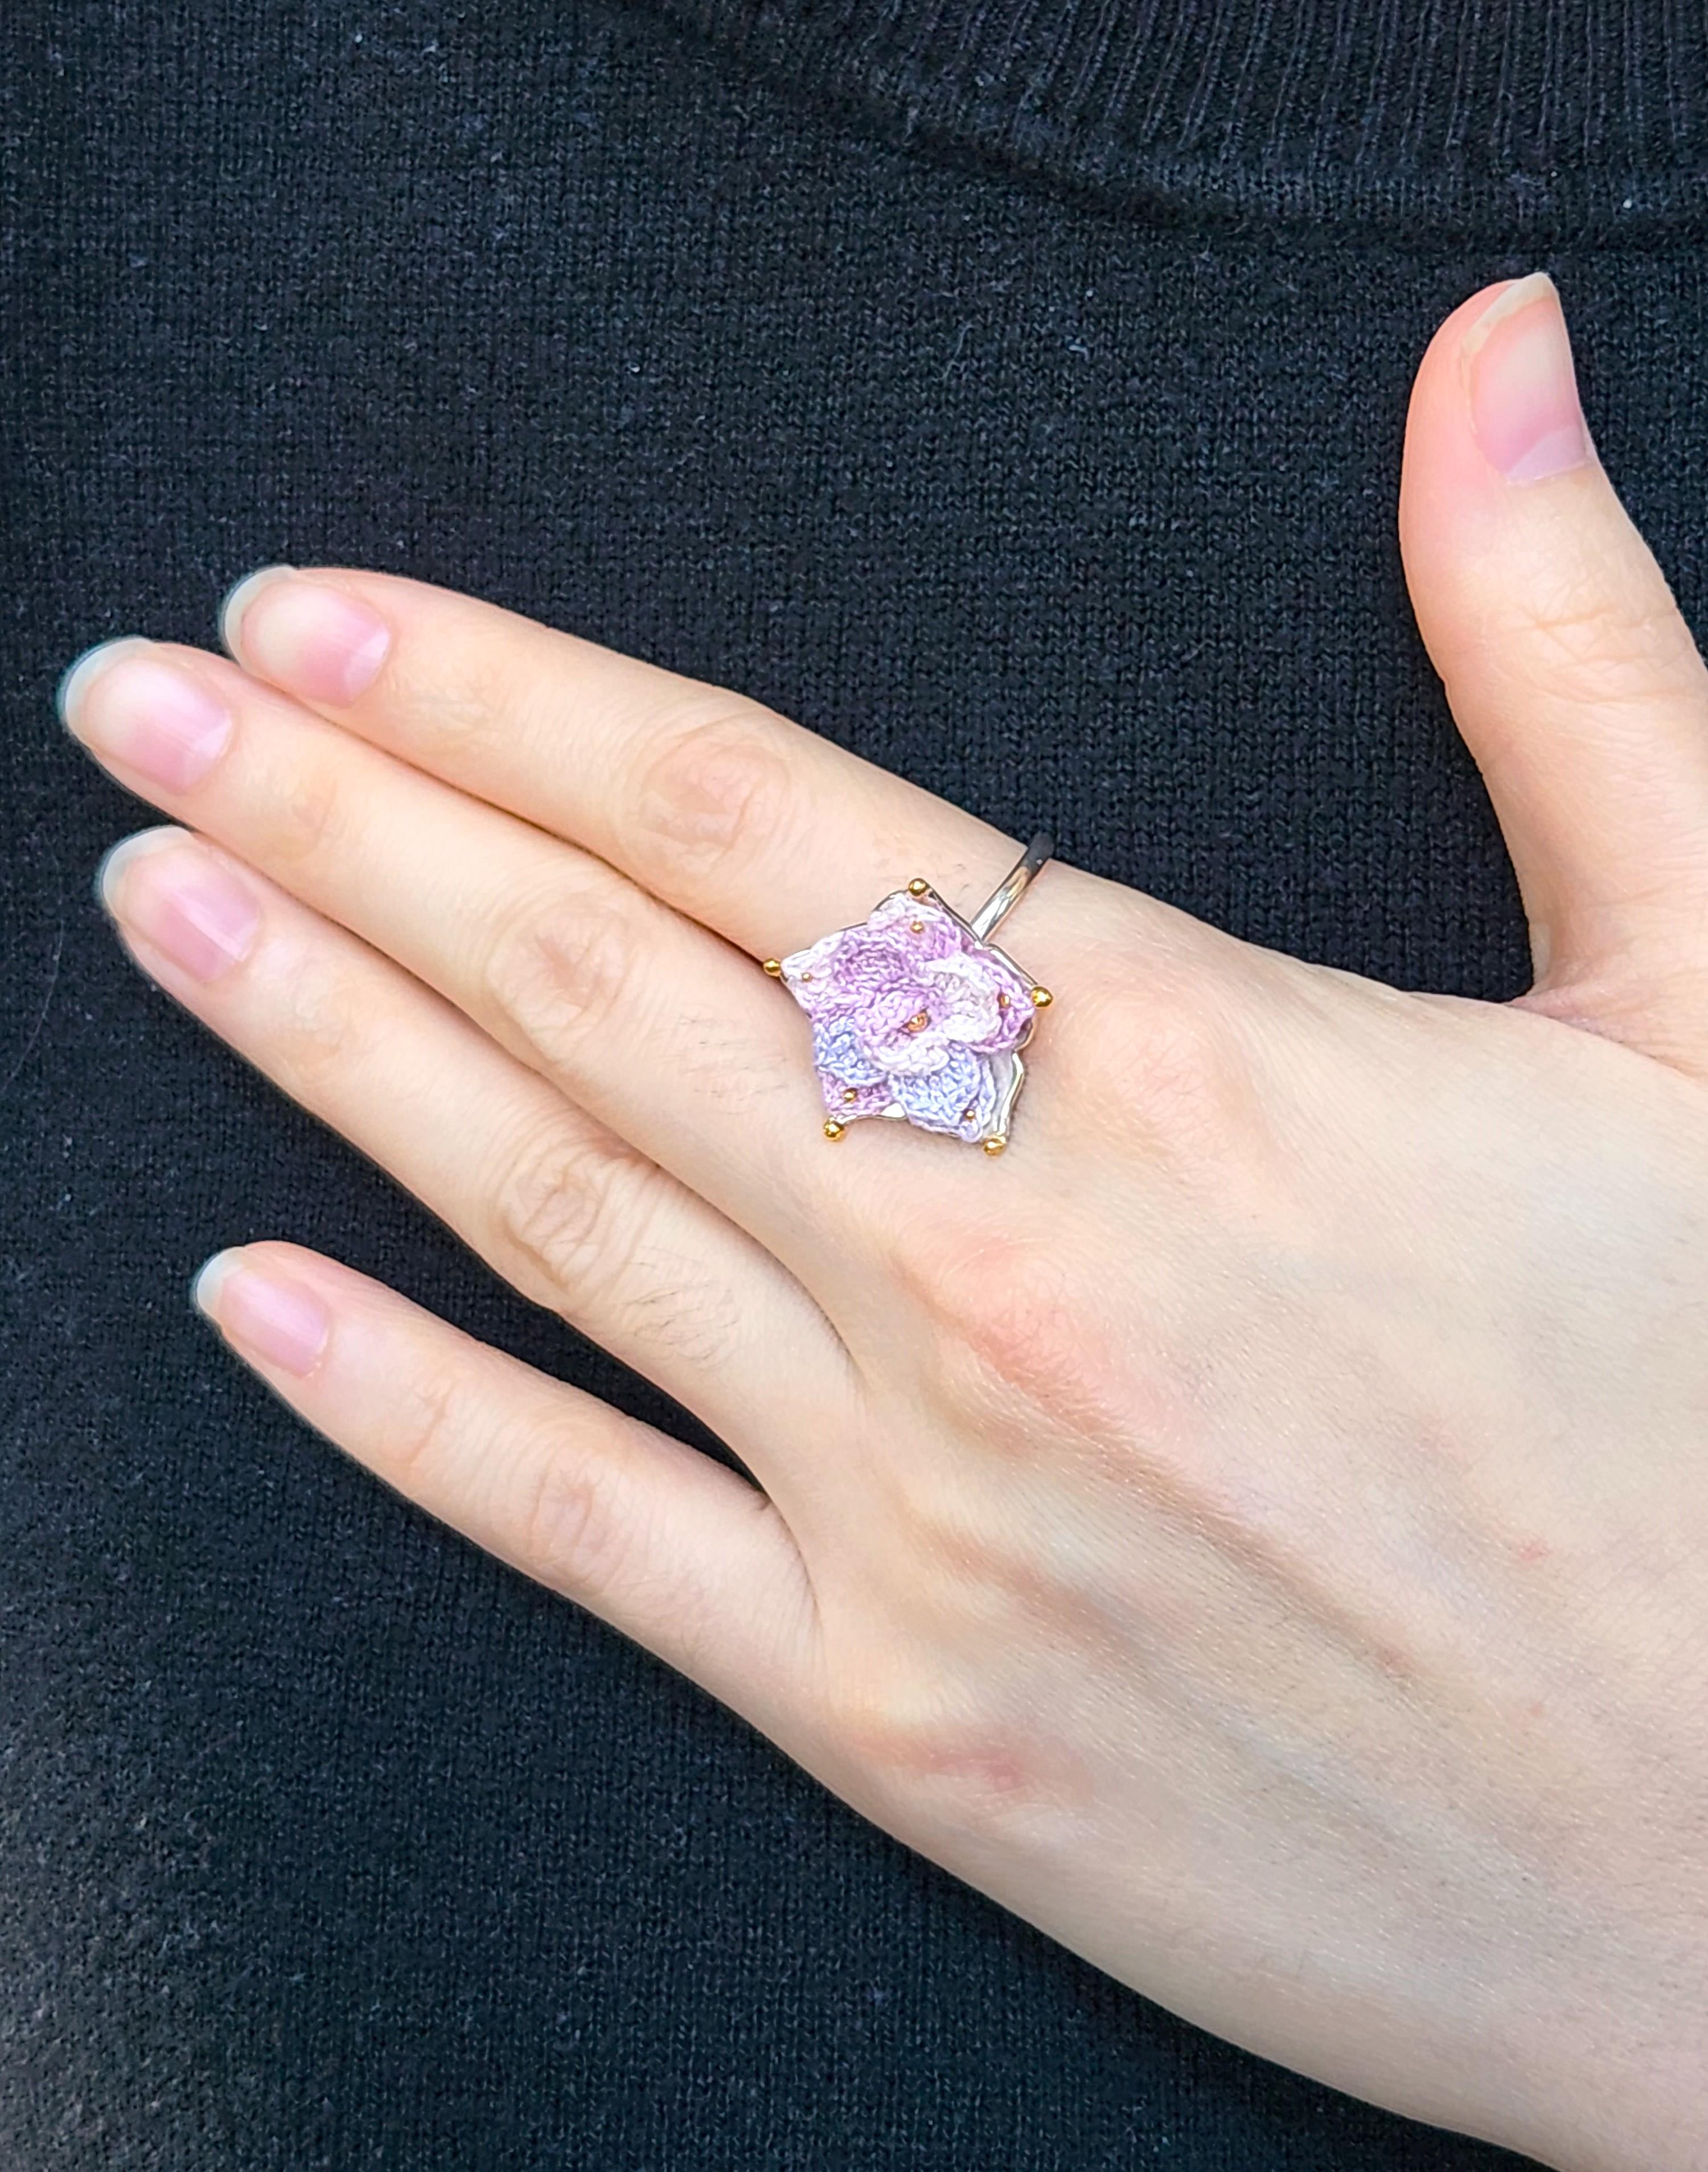 Hand Knit Pink Flower Set in a Handmade Sterling Silver and 14K Gold Bead Ring In New Condition For Sale In Rutherford, NJ